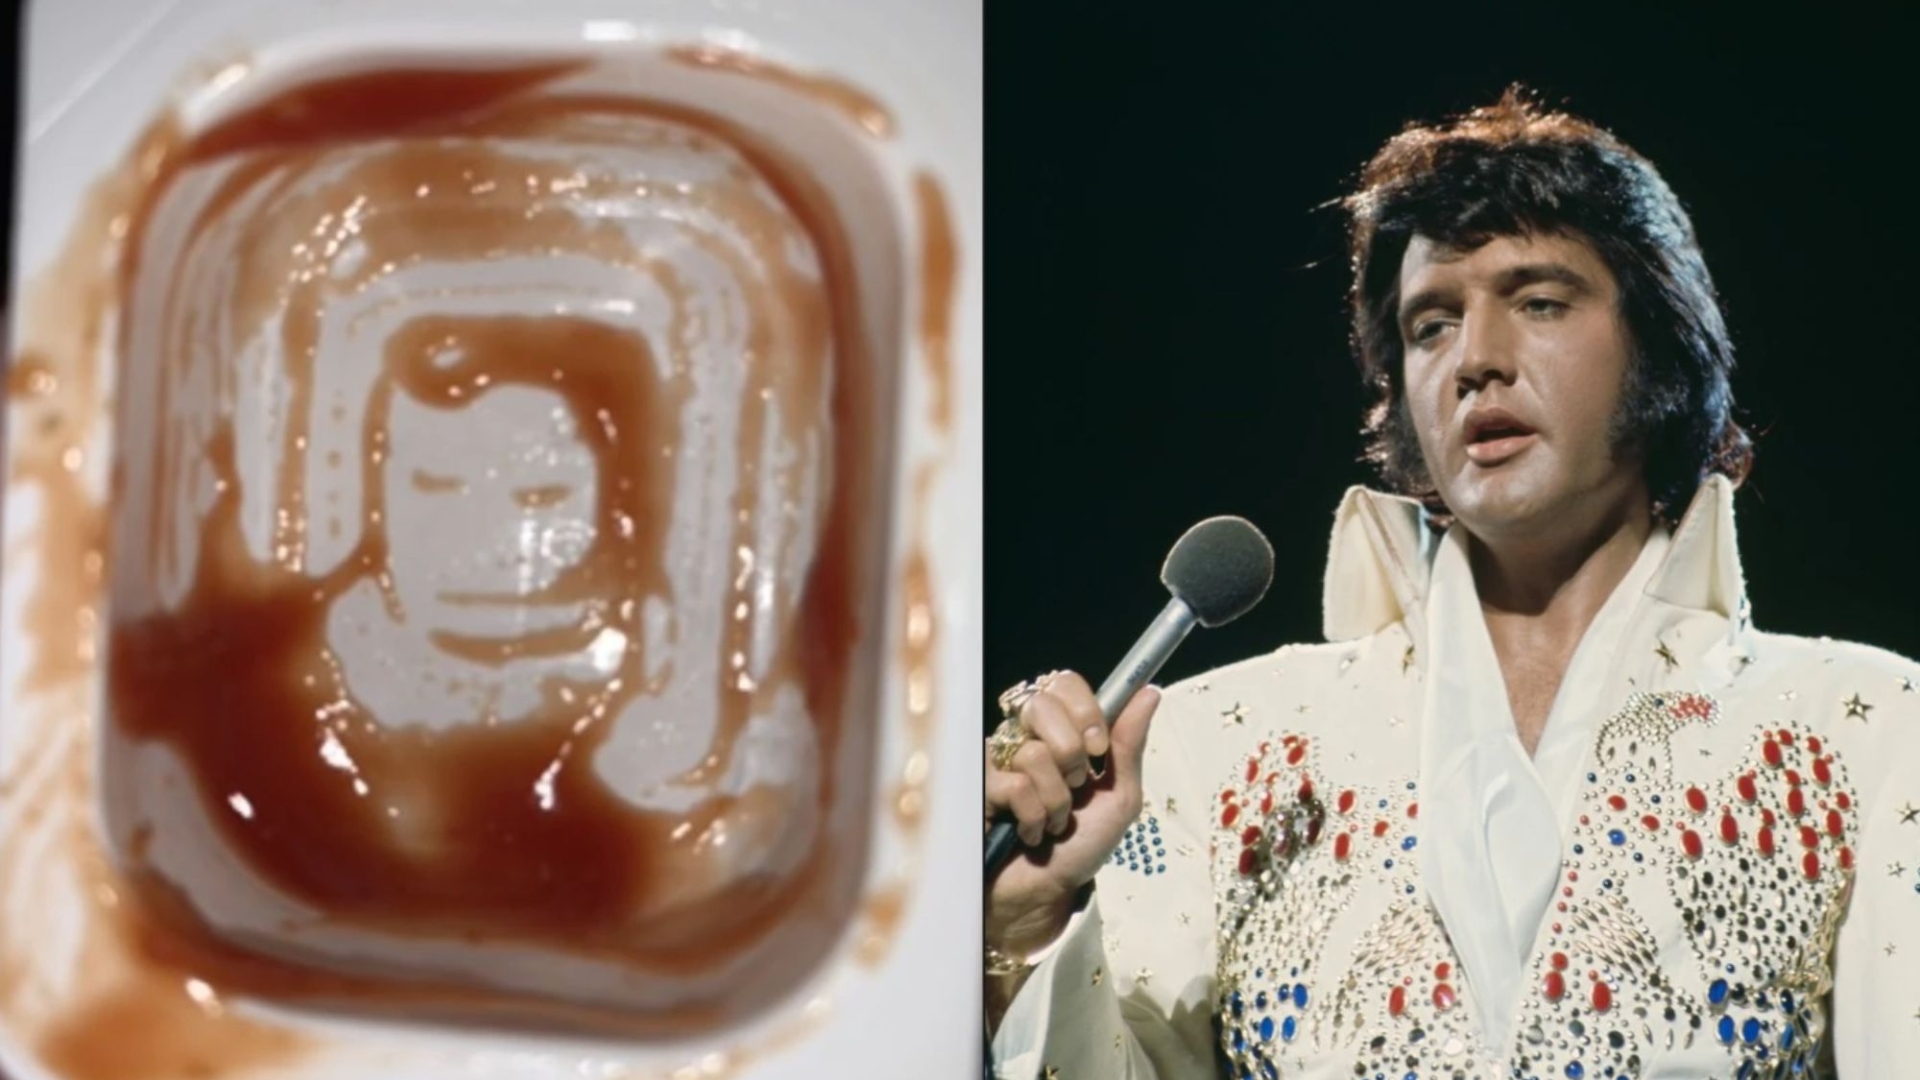 I was stunned to see Elvis' face in my pot of McDonald's ketchup